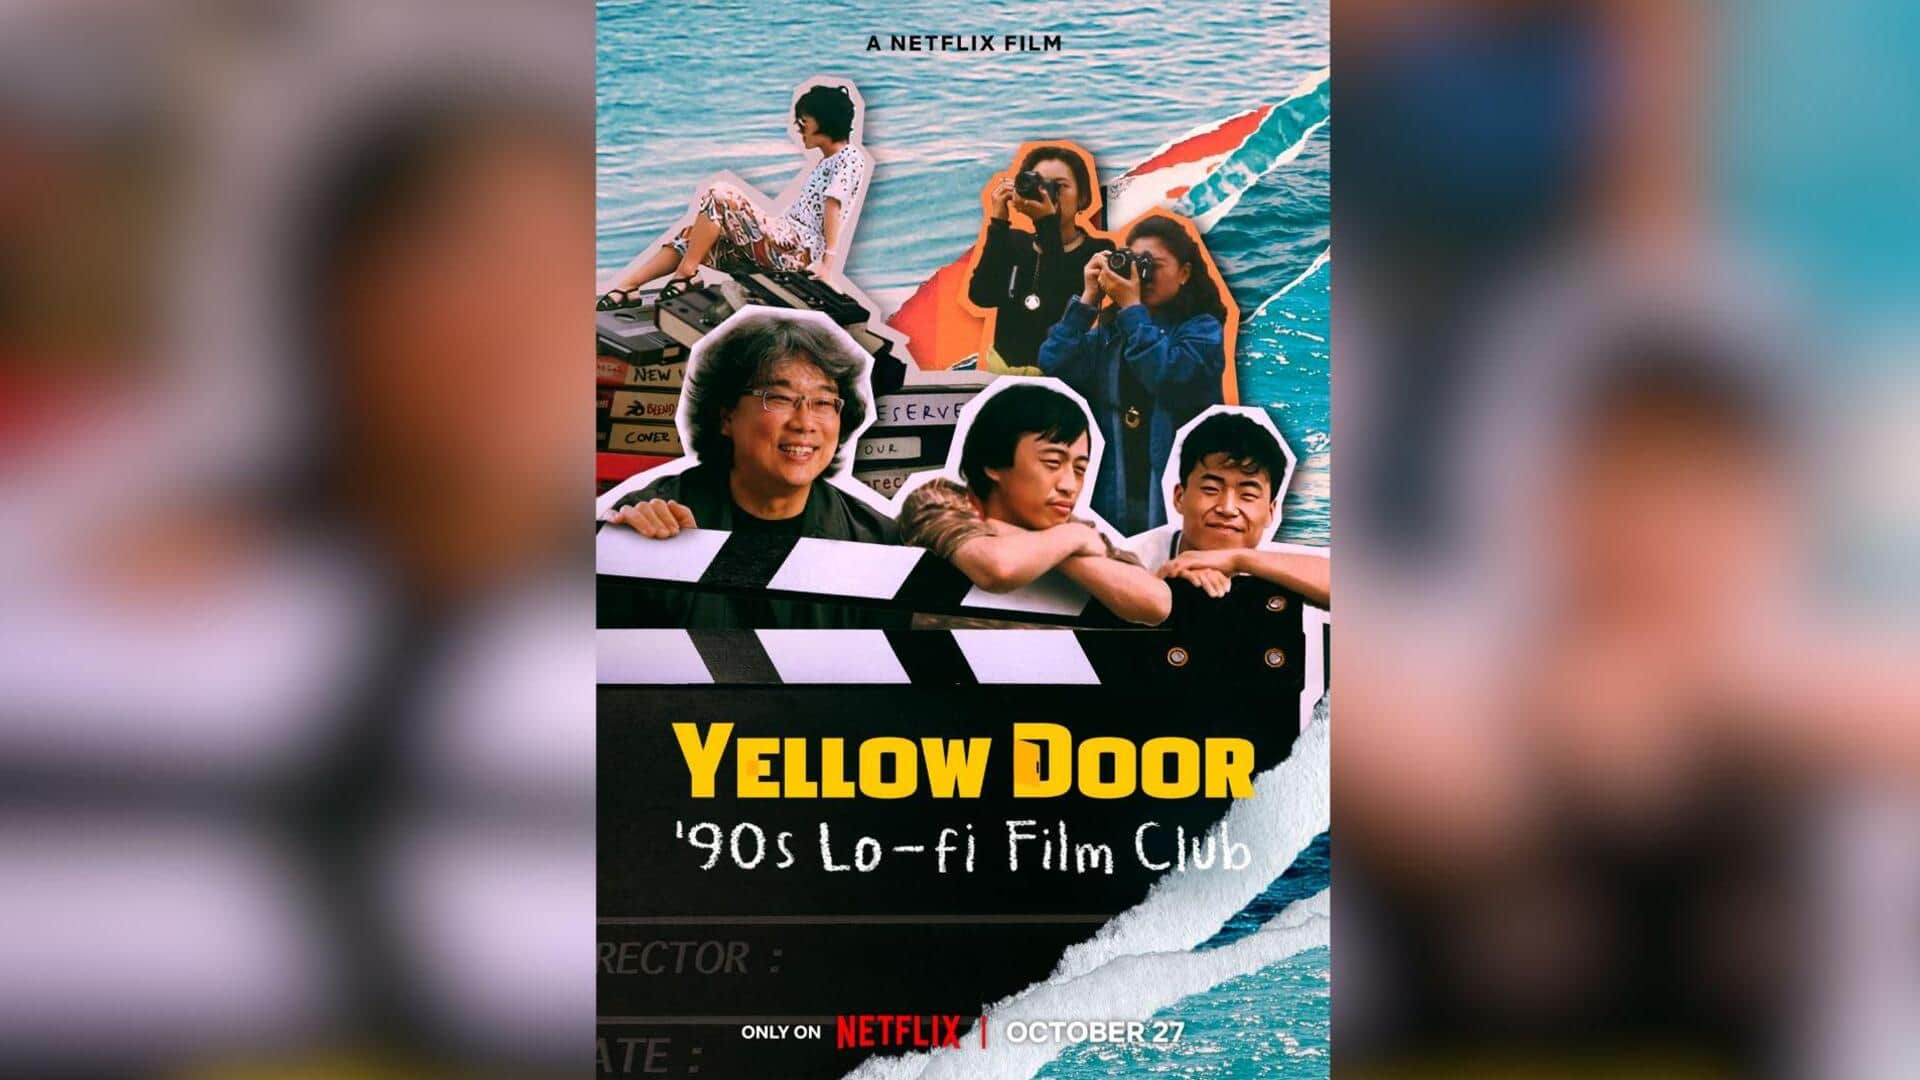 Bong Joon-ho's 'Yellow Door' documentary—when and where to watch